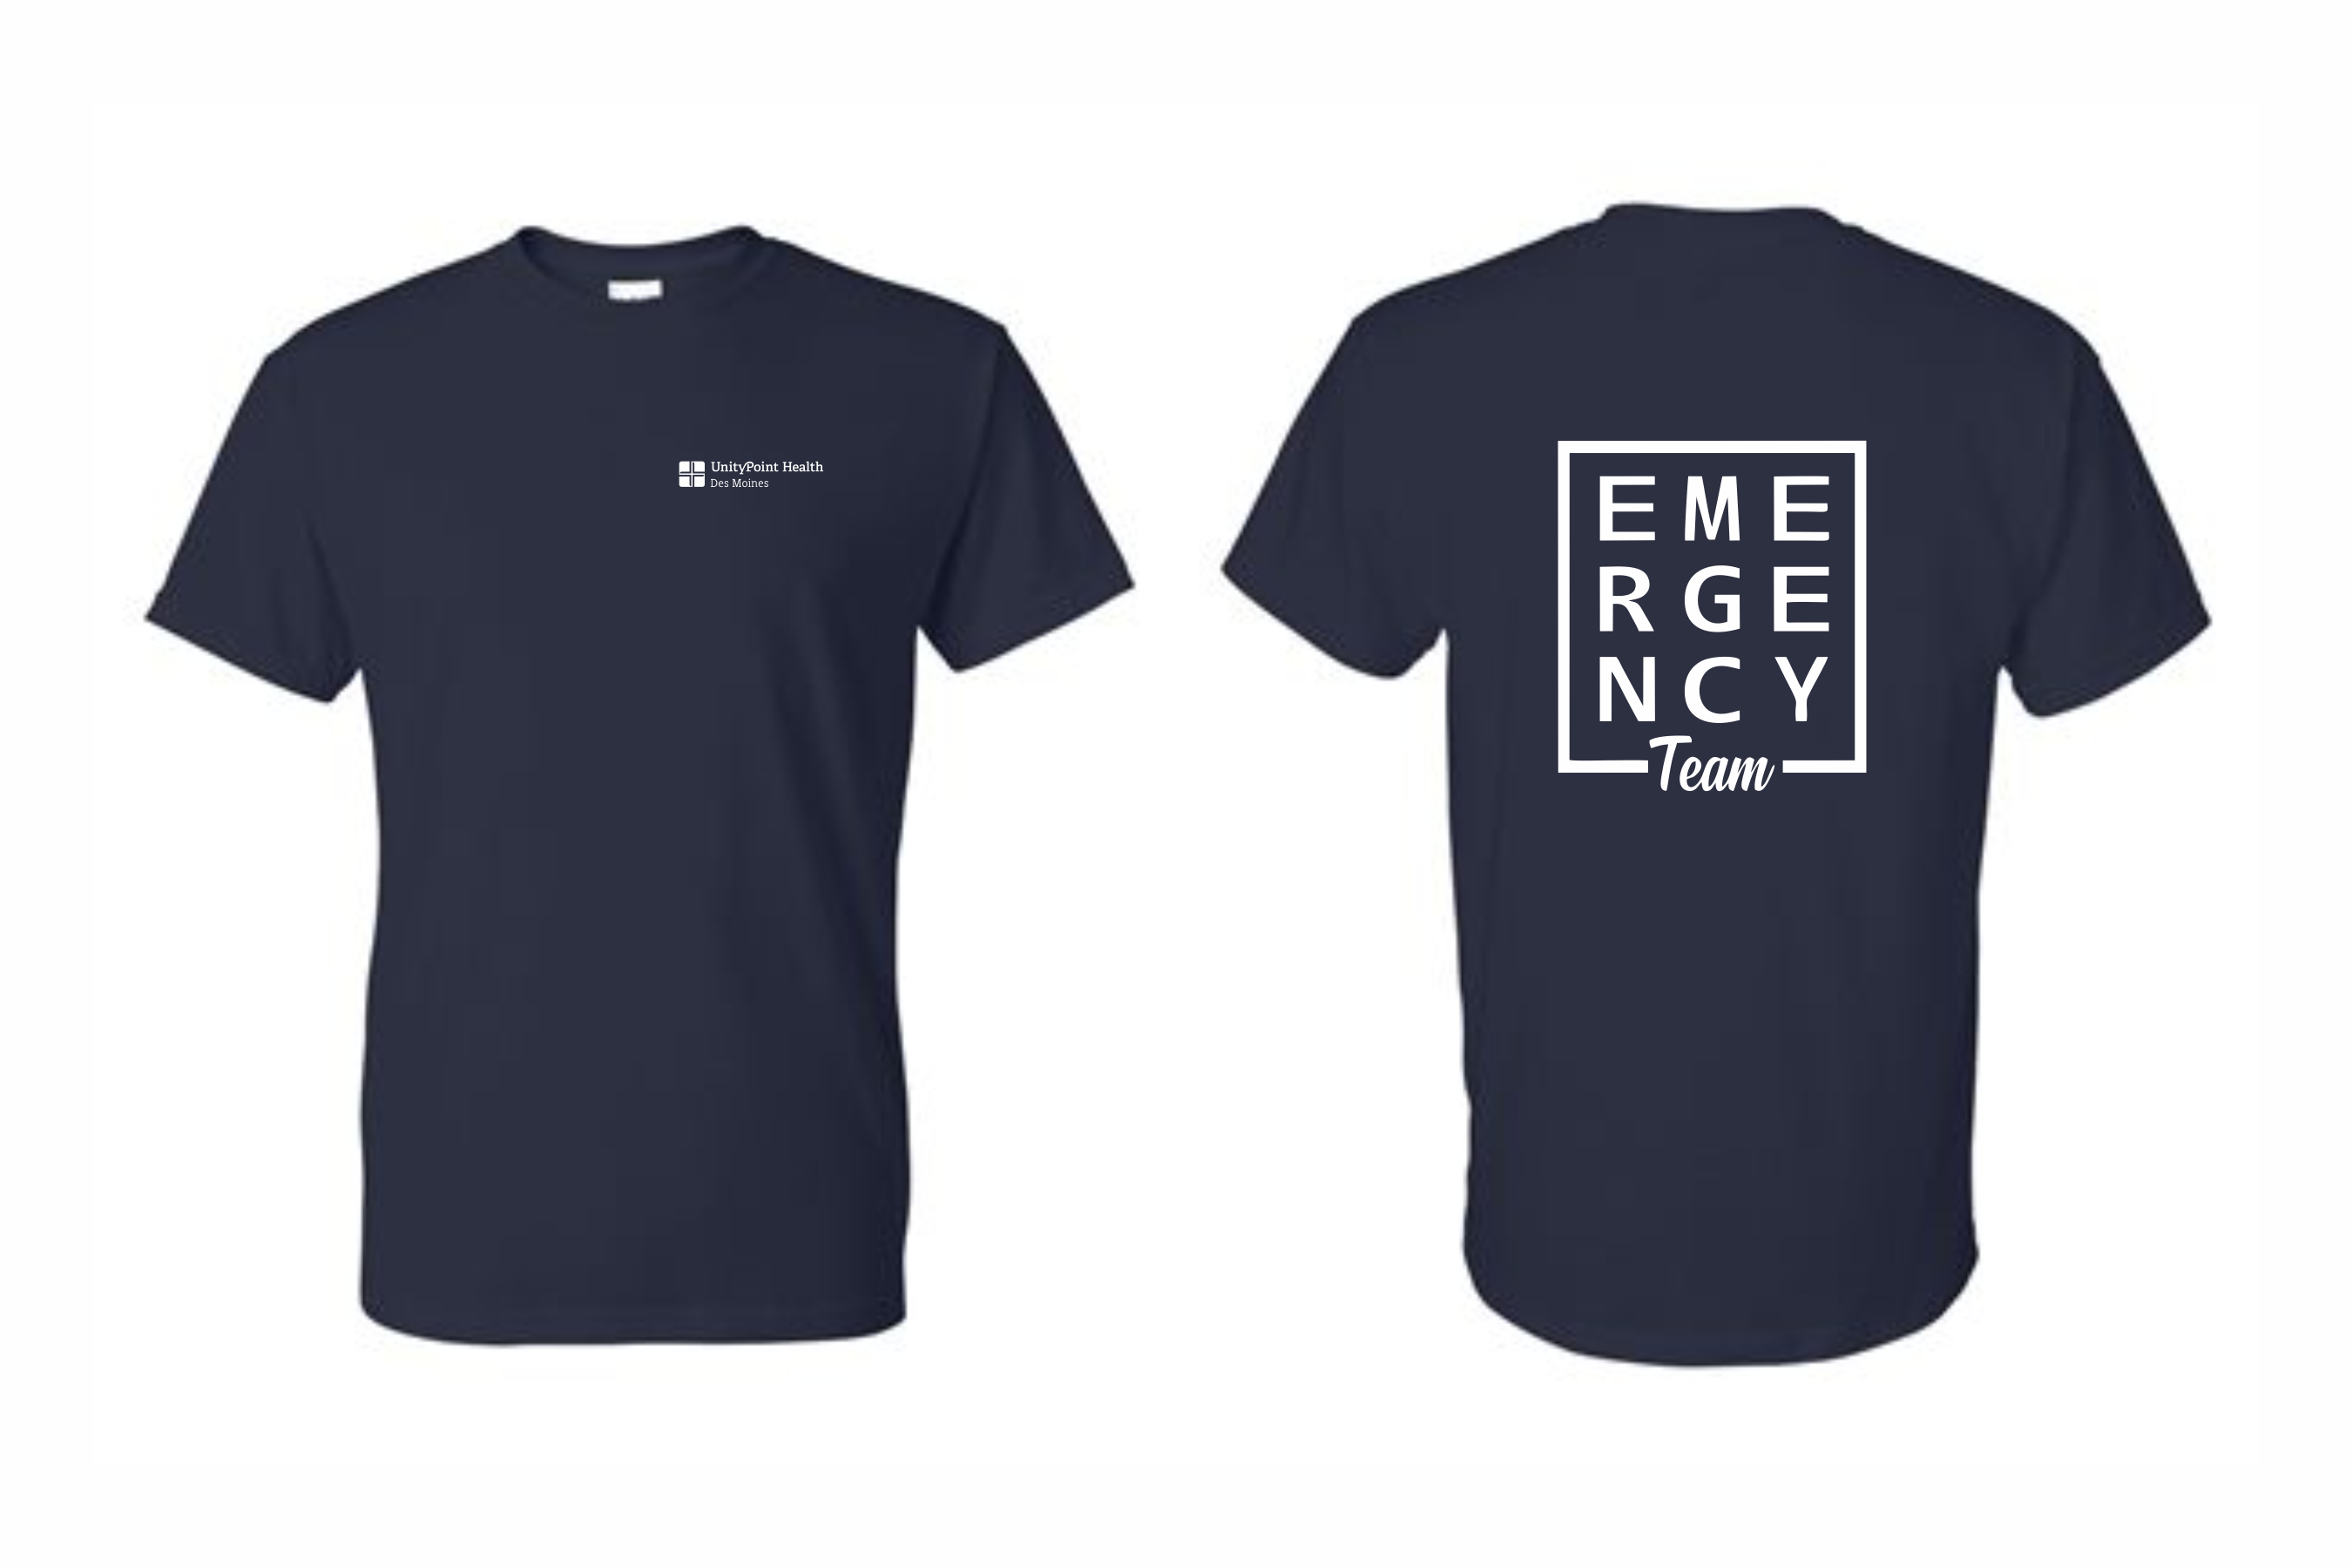 UnityPoint Des Moines Navy T-Shirt